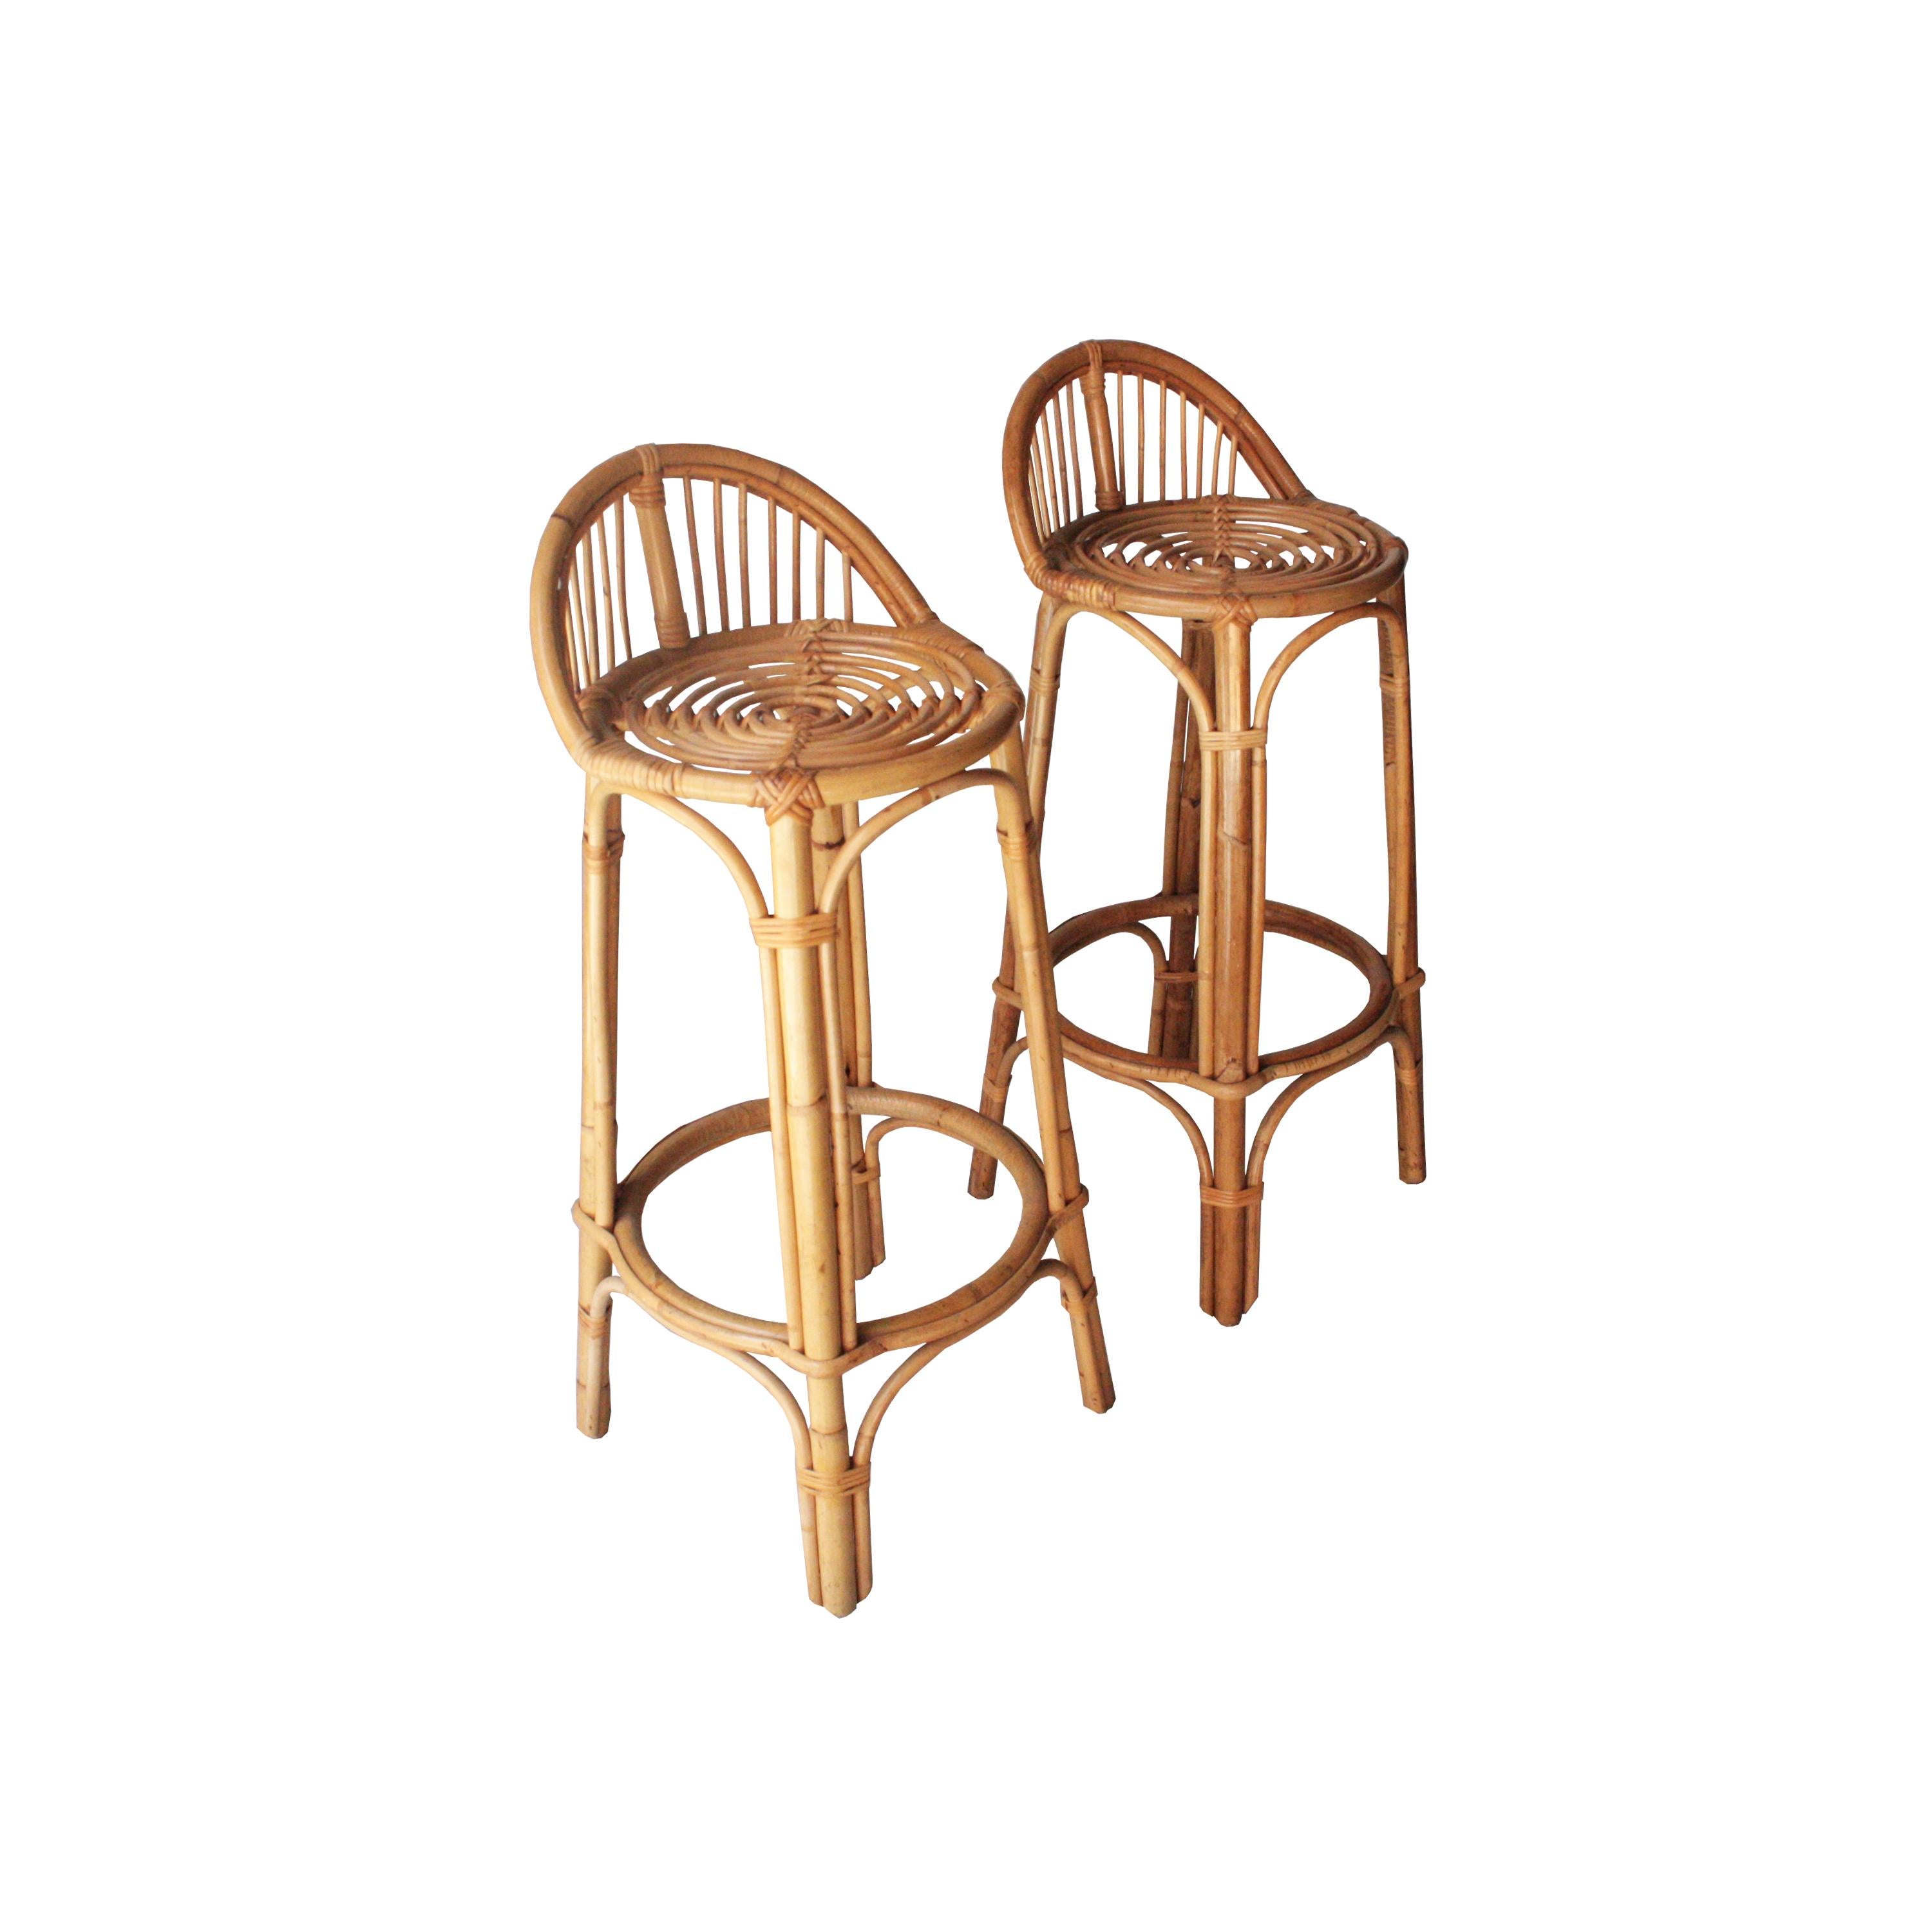 Pair of high stools with back and structure made of bamboo.